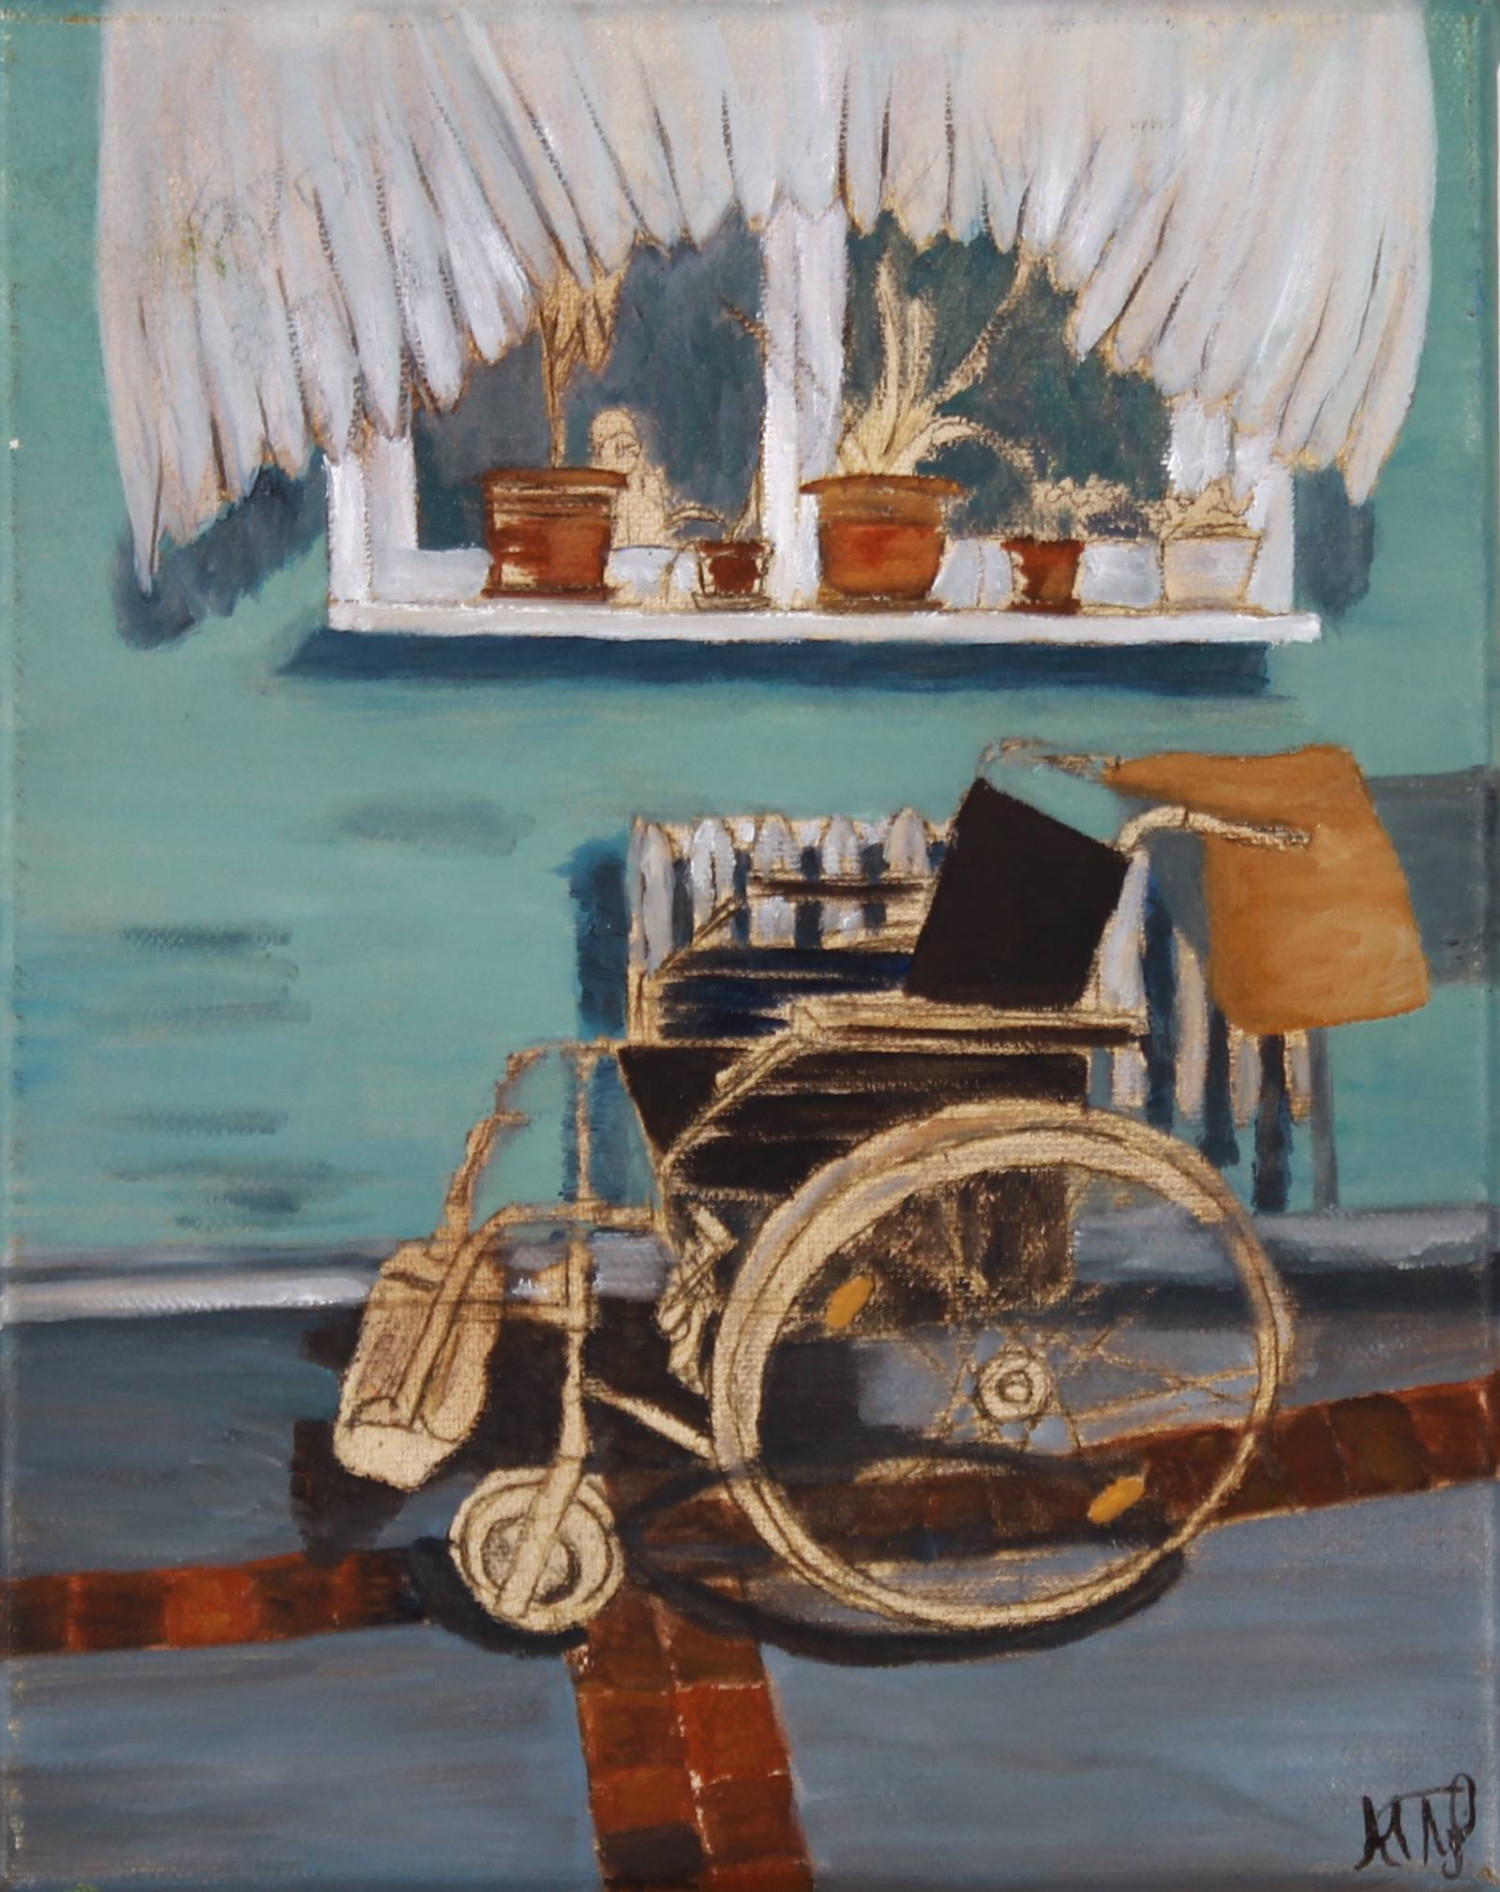 *The Abandoned Chair*, oil on canvas, 30 x 20cm